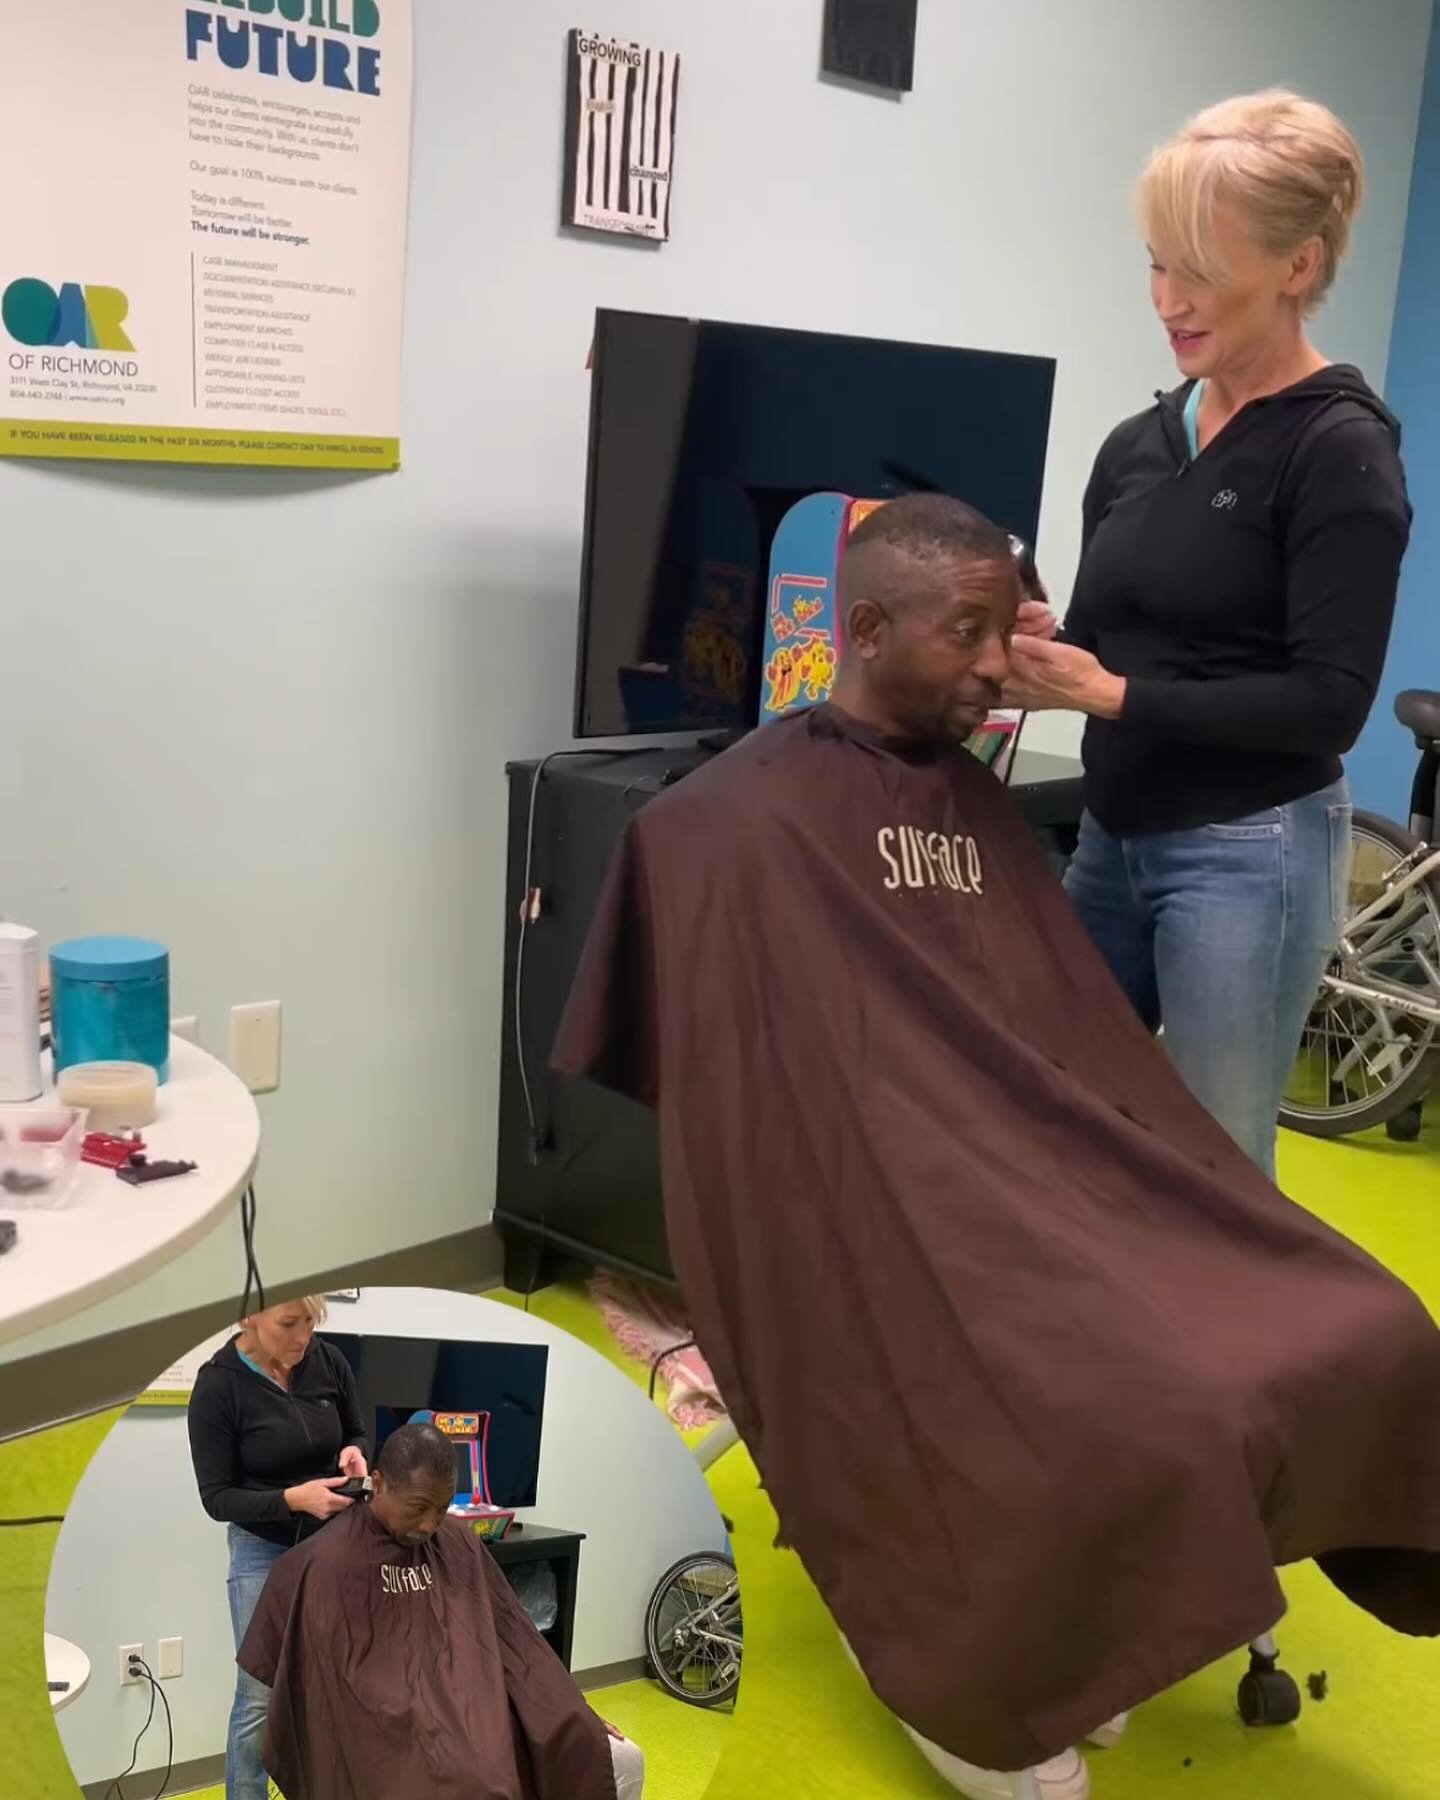 Thanks to our long-time supporter, now volunteer, MJ for coming in this week to cut hair for our participants. #rva #reentrymatters #volunteer 💈✂️